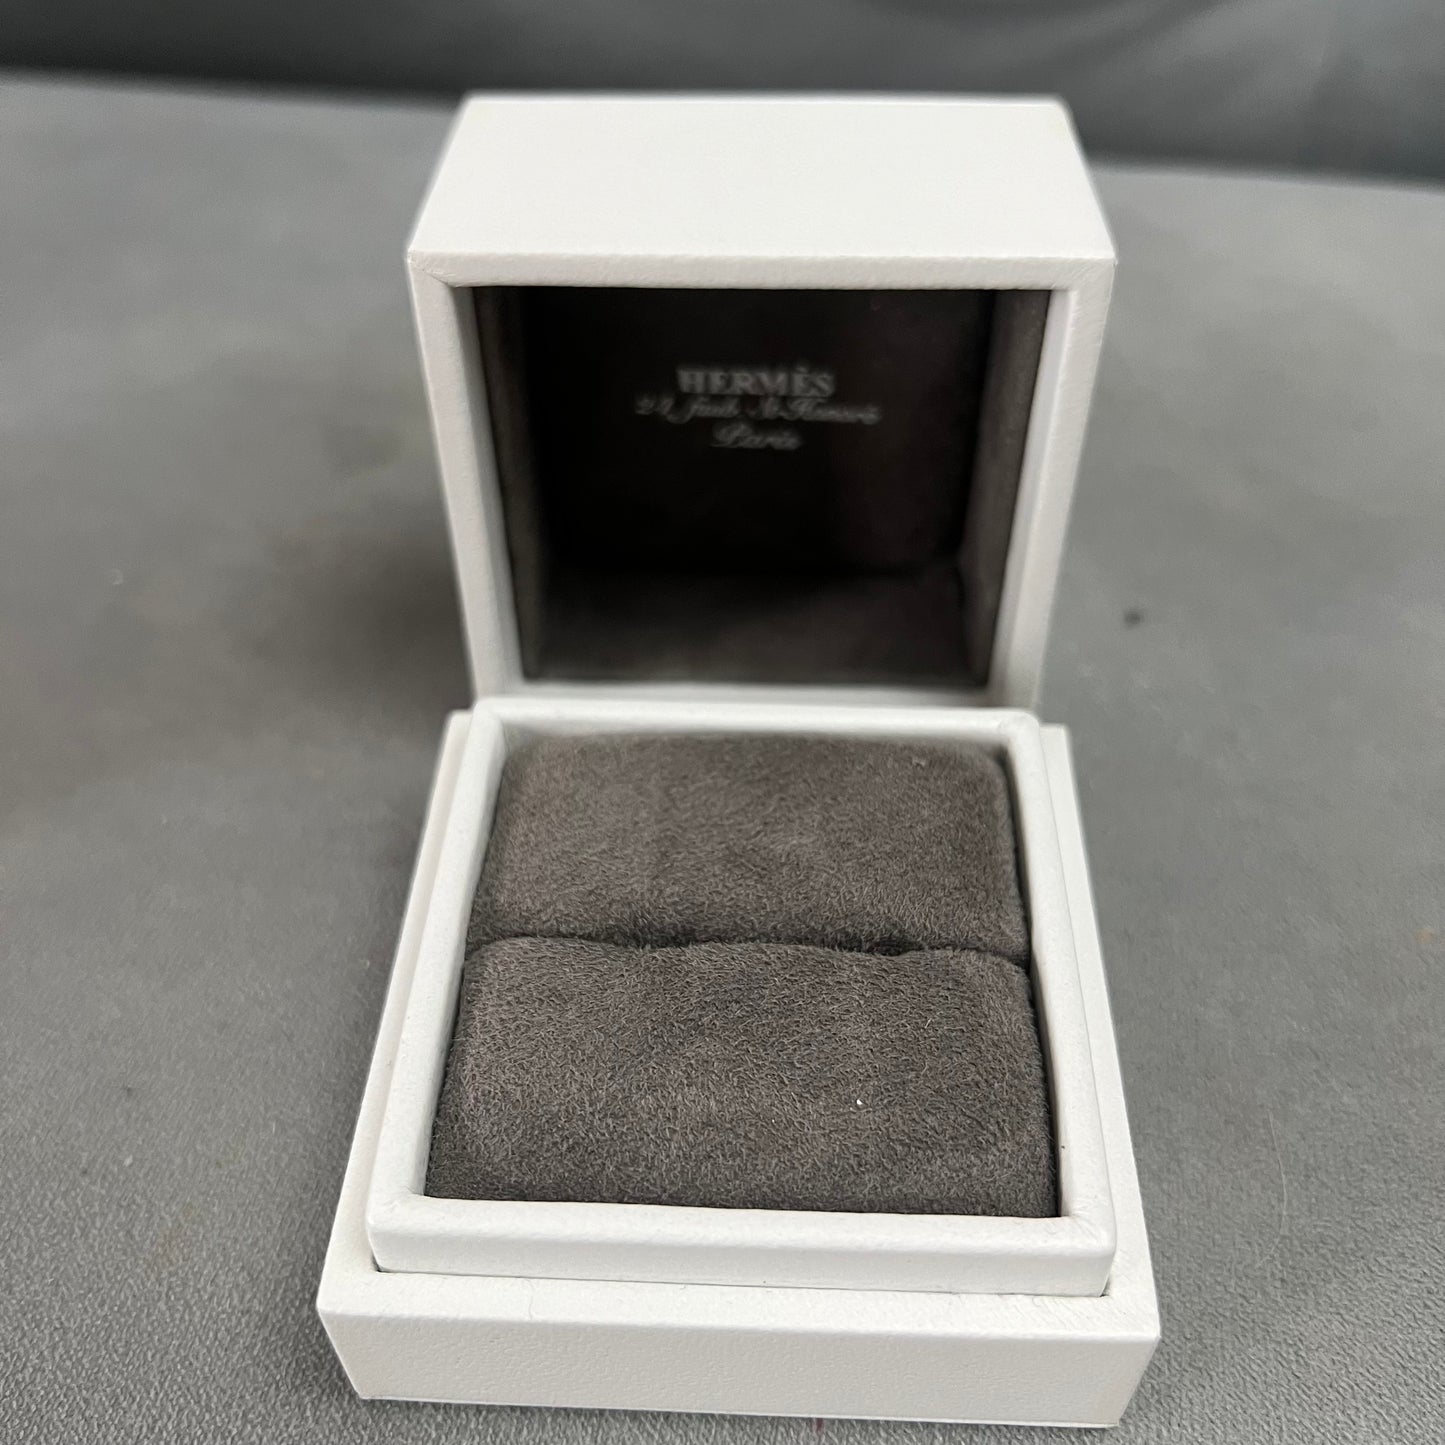 HERMES  Ring/Earrings/Cufflinks Box + Outer Box 3x3x2.5 inches